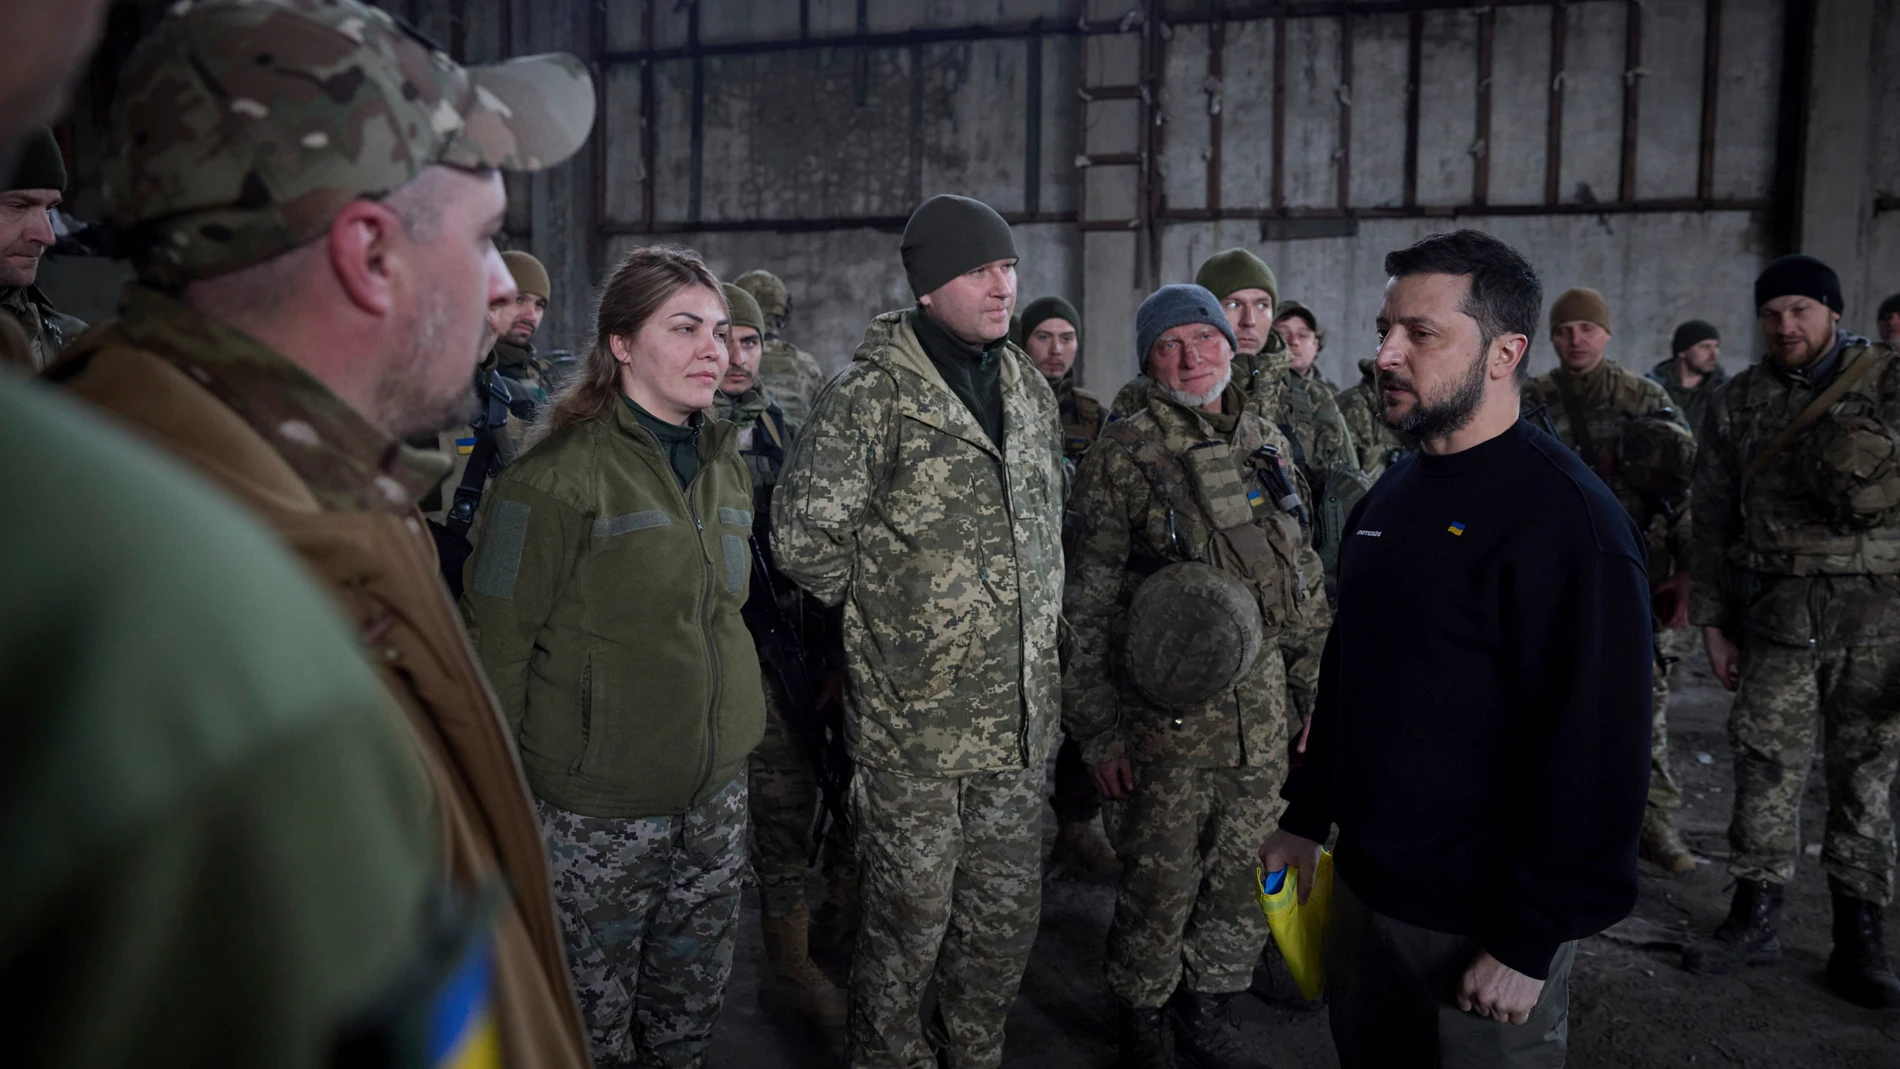 March 22, 2023, Bakhmut, Donetsk Oblast, Ukraine: Ukrainian President Volodymyr Zelenskyy, right, chats with soldiers during a visit to the frontlines positions in the Donetsk region, March 22, 2023 in Bakhmut, Ukraine. Zelenskyy boosted morale and presented state medals to the soldiers defending against the Russian invasion. 22/03/2023